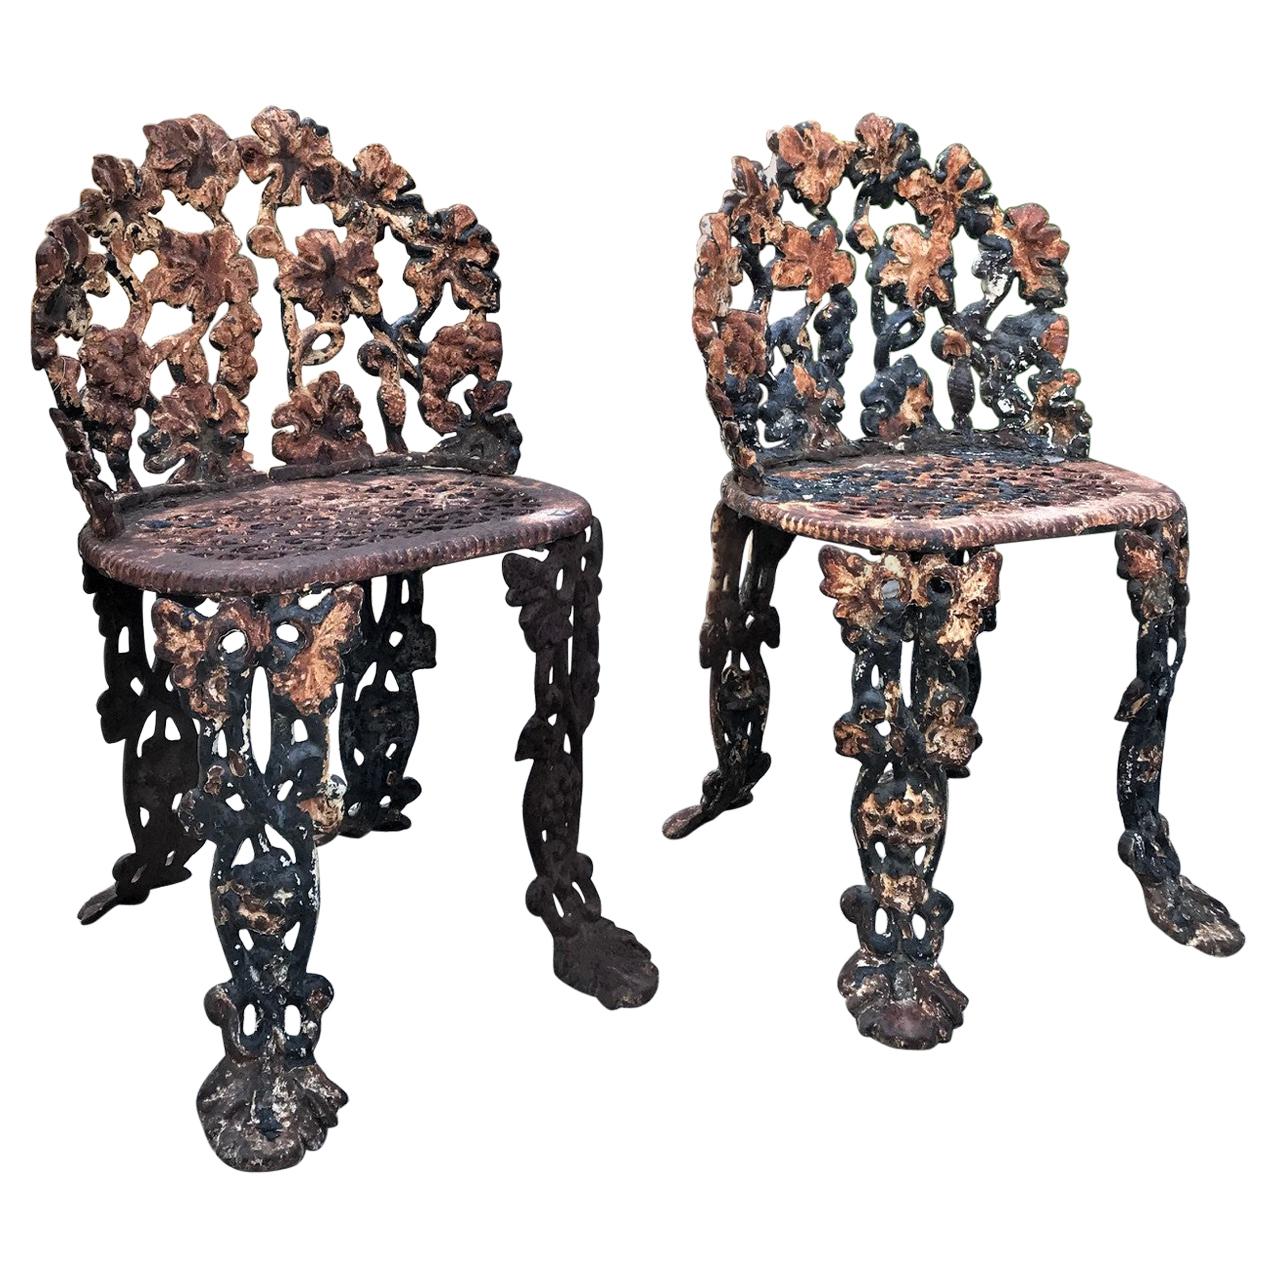 Pair of Napoleon III Side Hand made Garden Chairs Furniture Cast Iron Antique LA